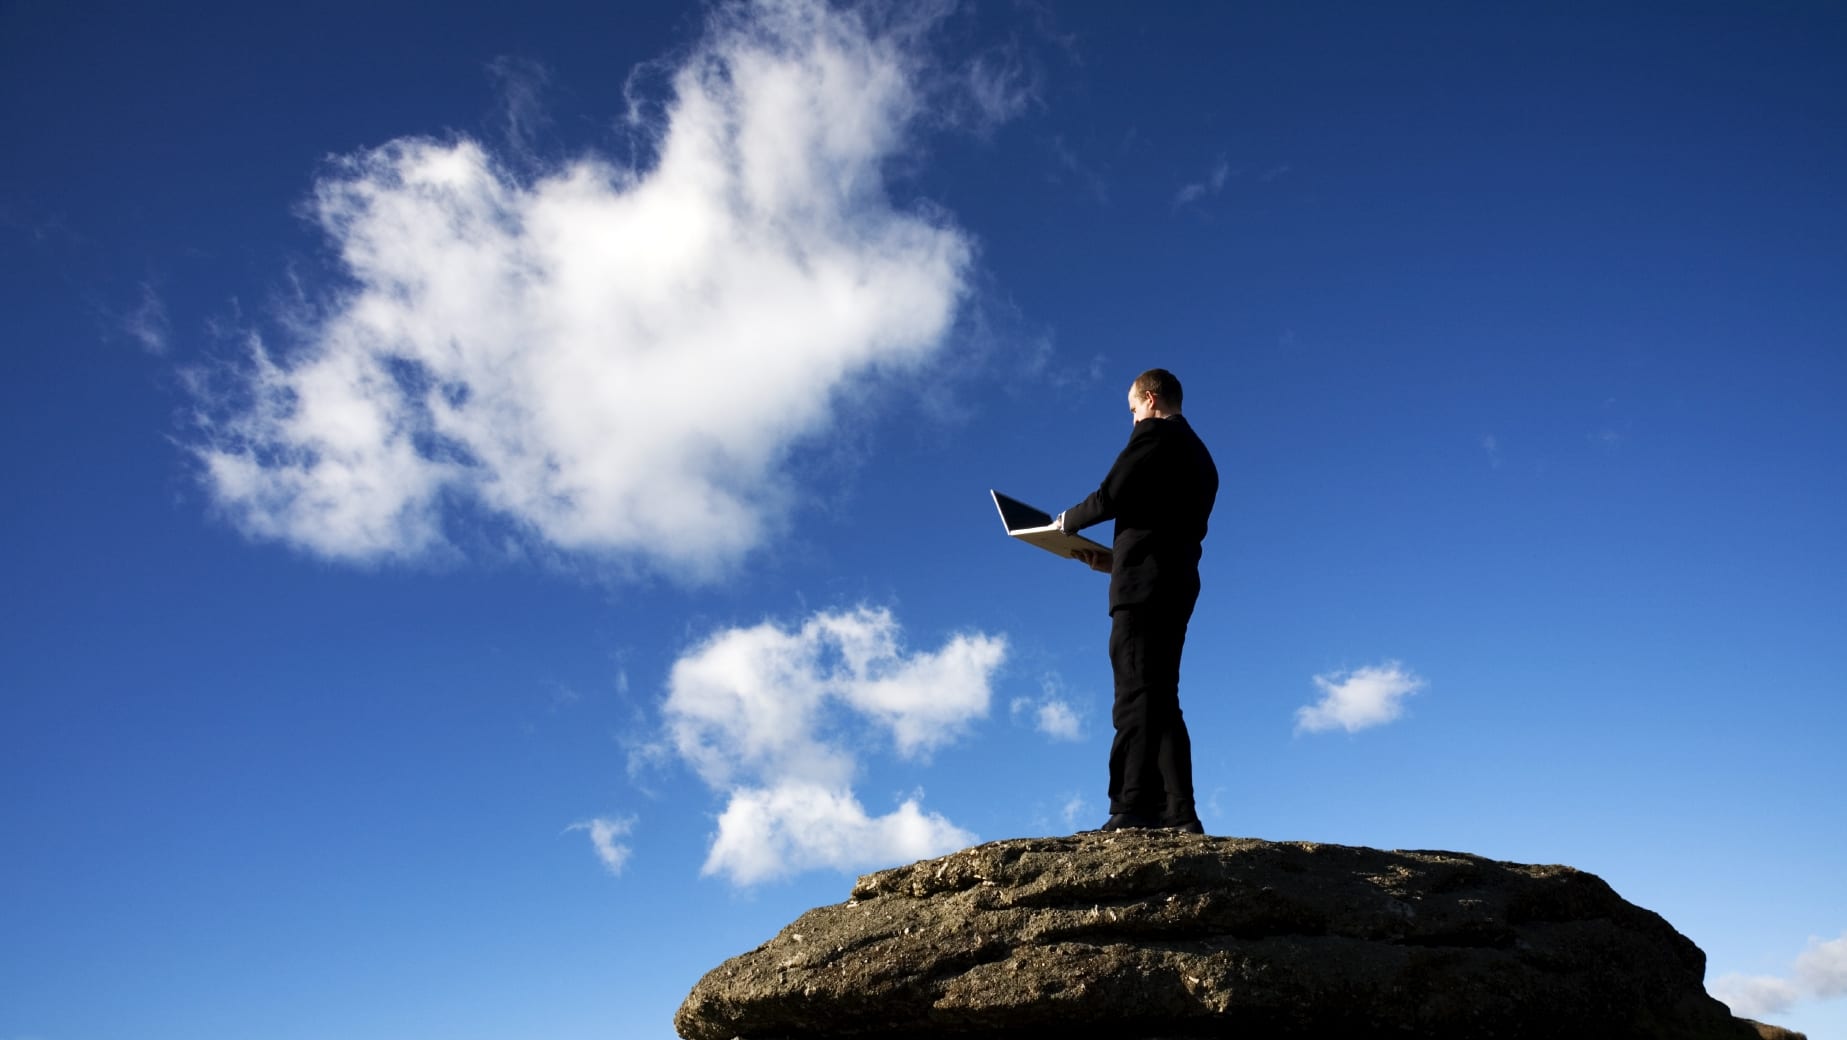 Why Business Is Making a Giant Leap Into the Cloud